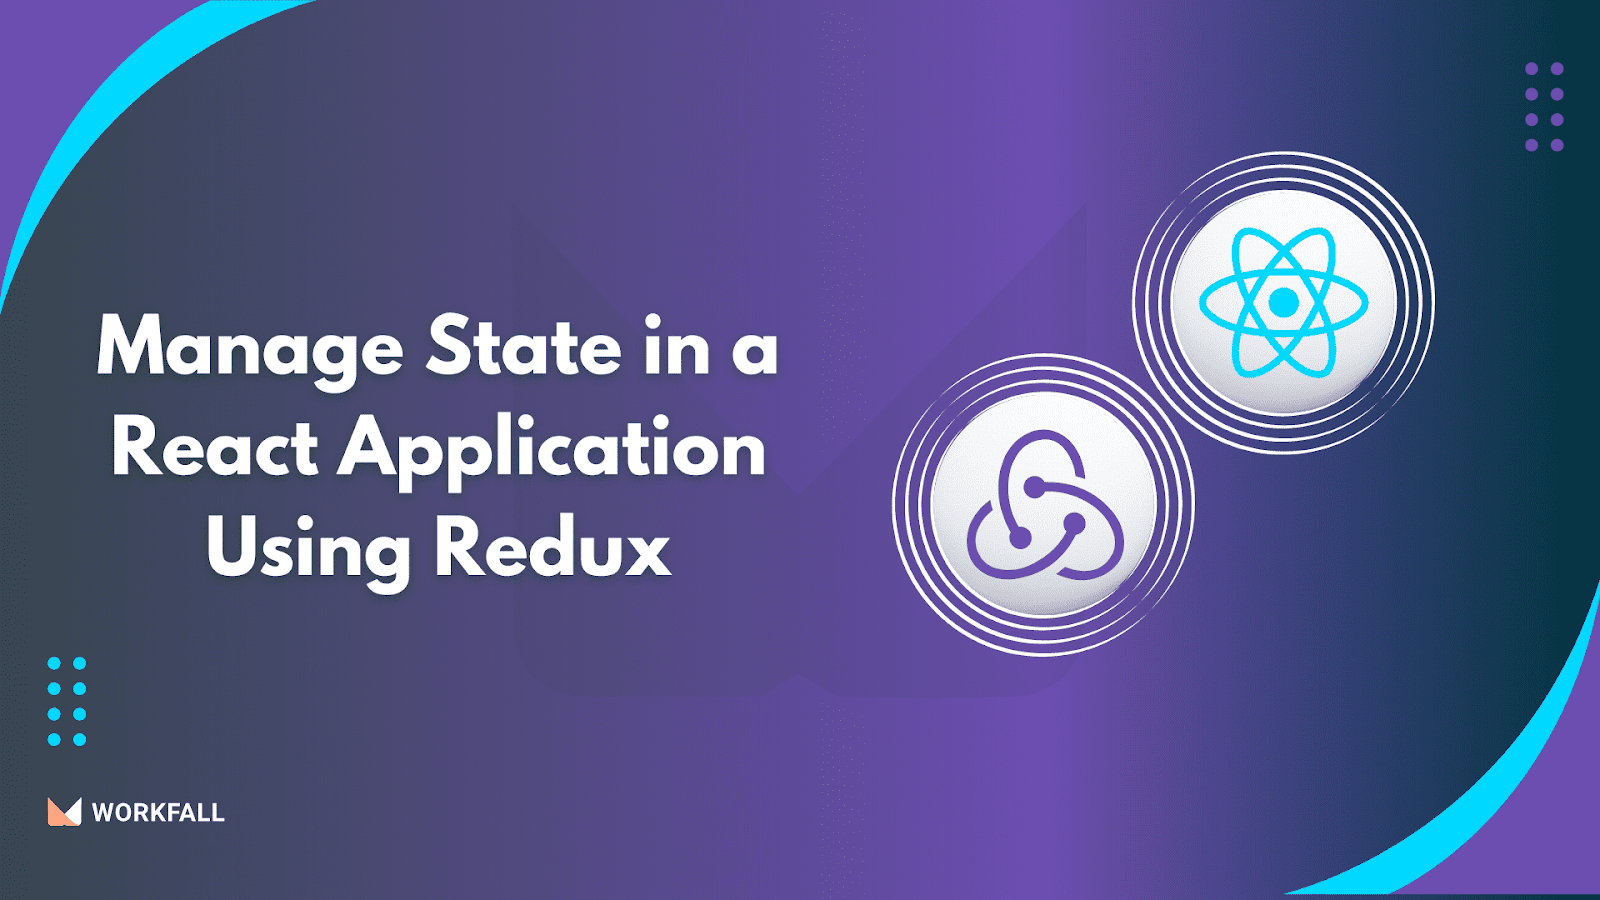 Manage State in a React Application Using Redux